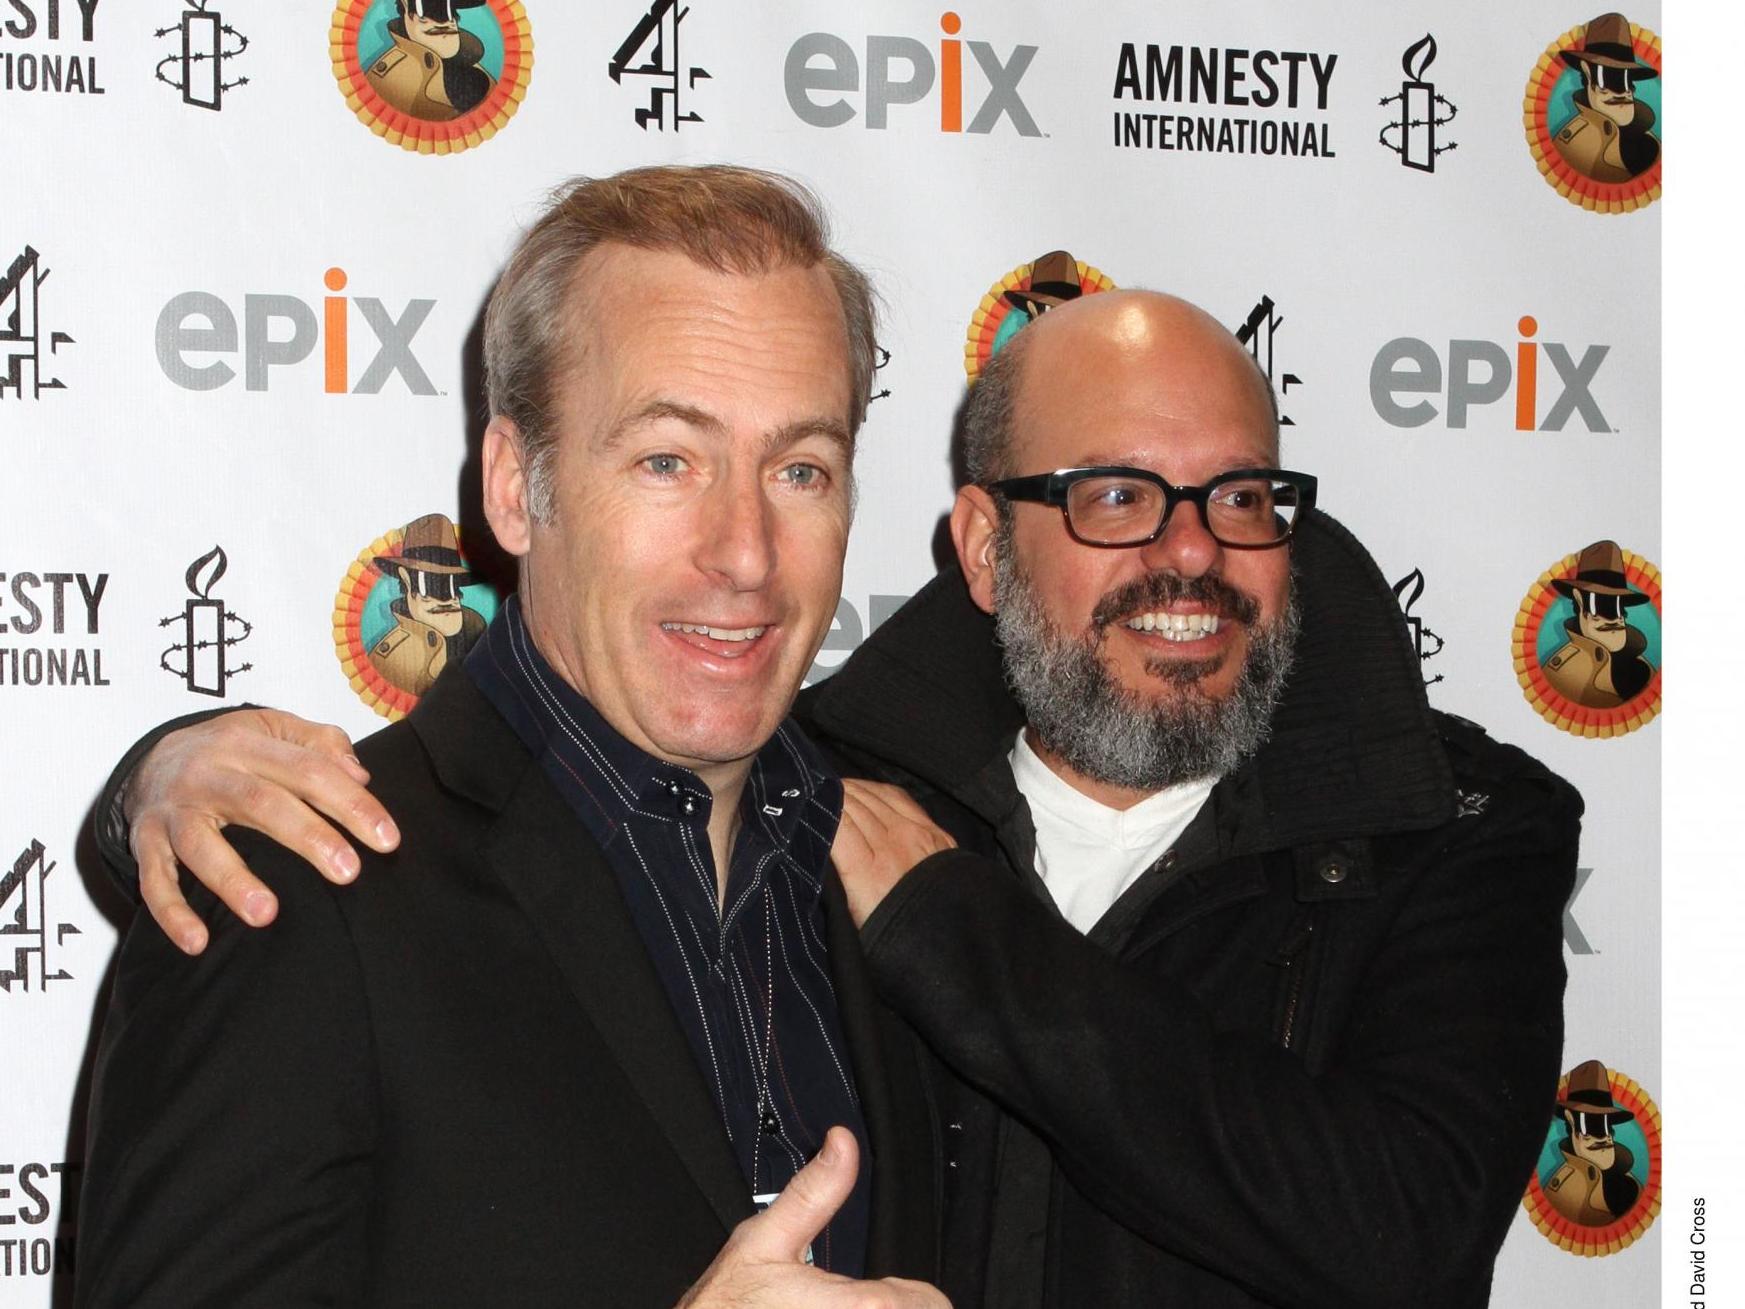 Bob Odenkirk and David Cross at an event in 2012